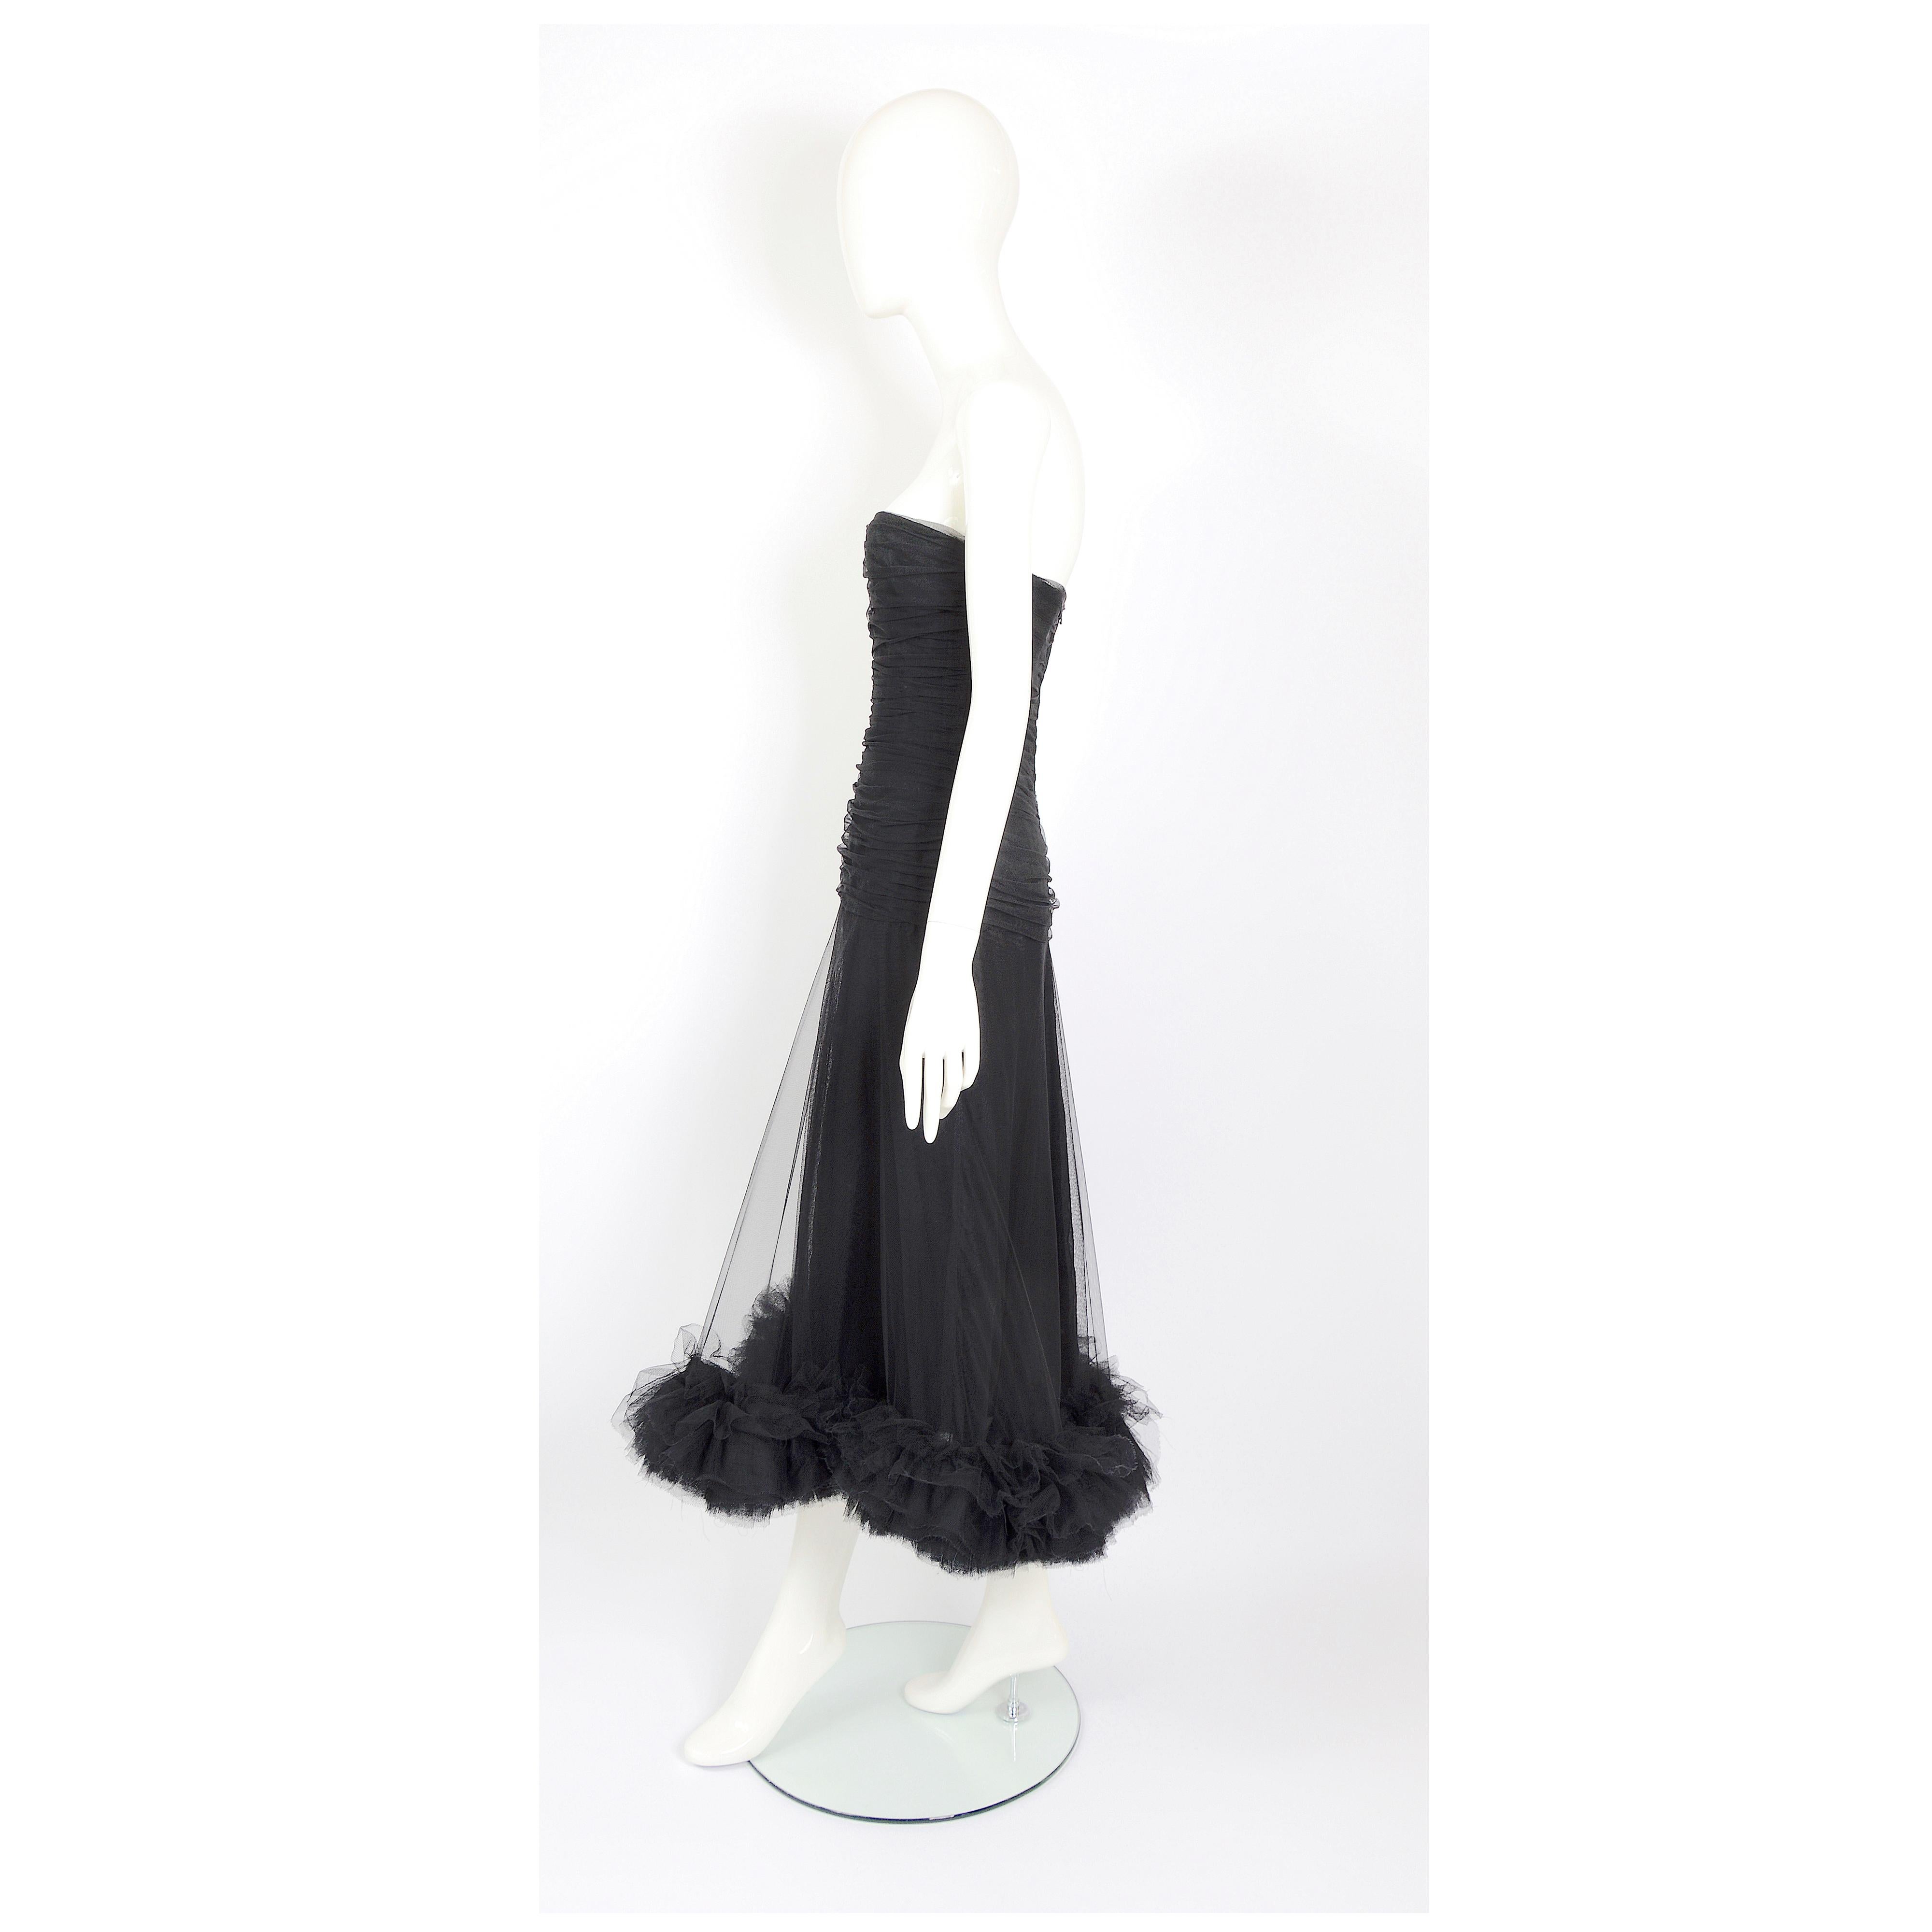 Christian Dior by Marc Bohan vintage numbered couture black tulle evening dress In Excellent Condition For Sale In Antwerpen, Vlaams Gewest